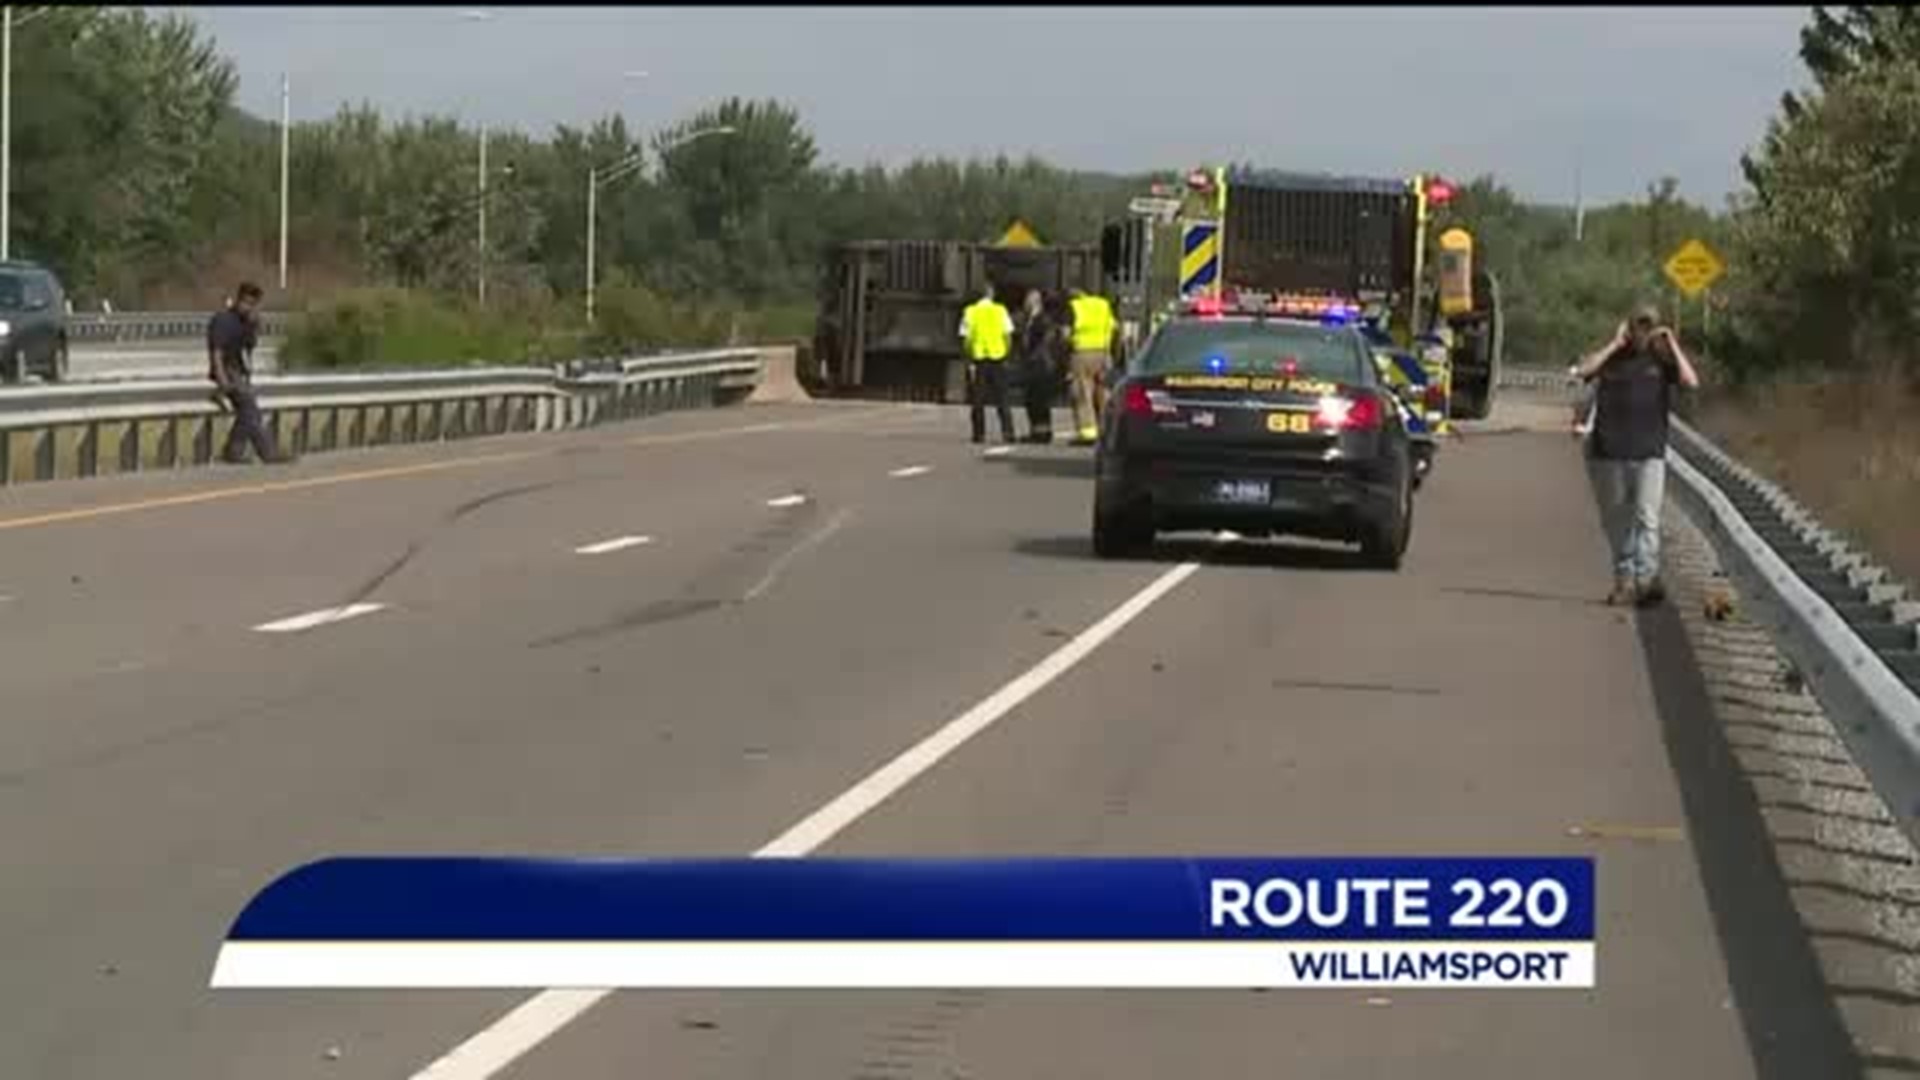 Highway in Williamsport Closed by Rig Rollover